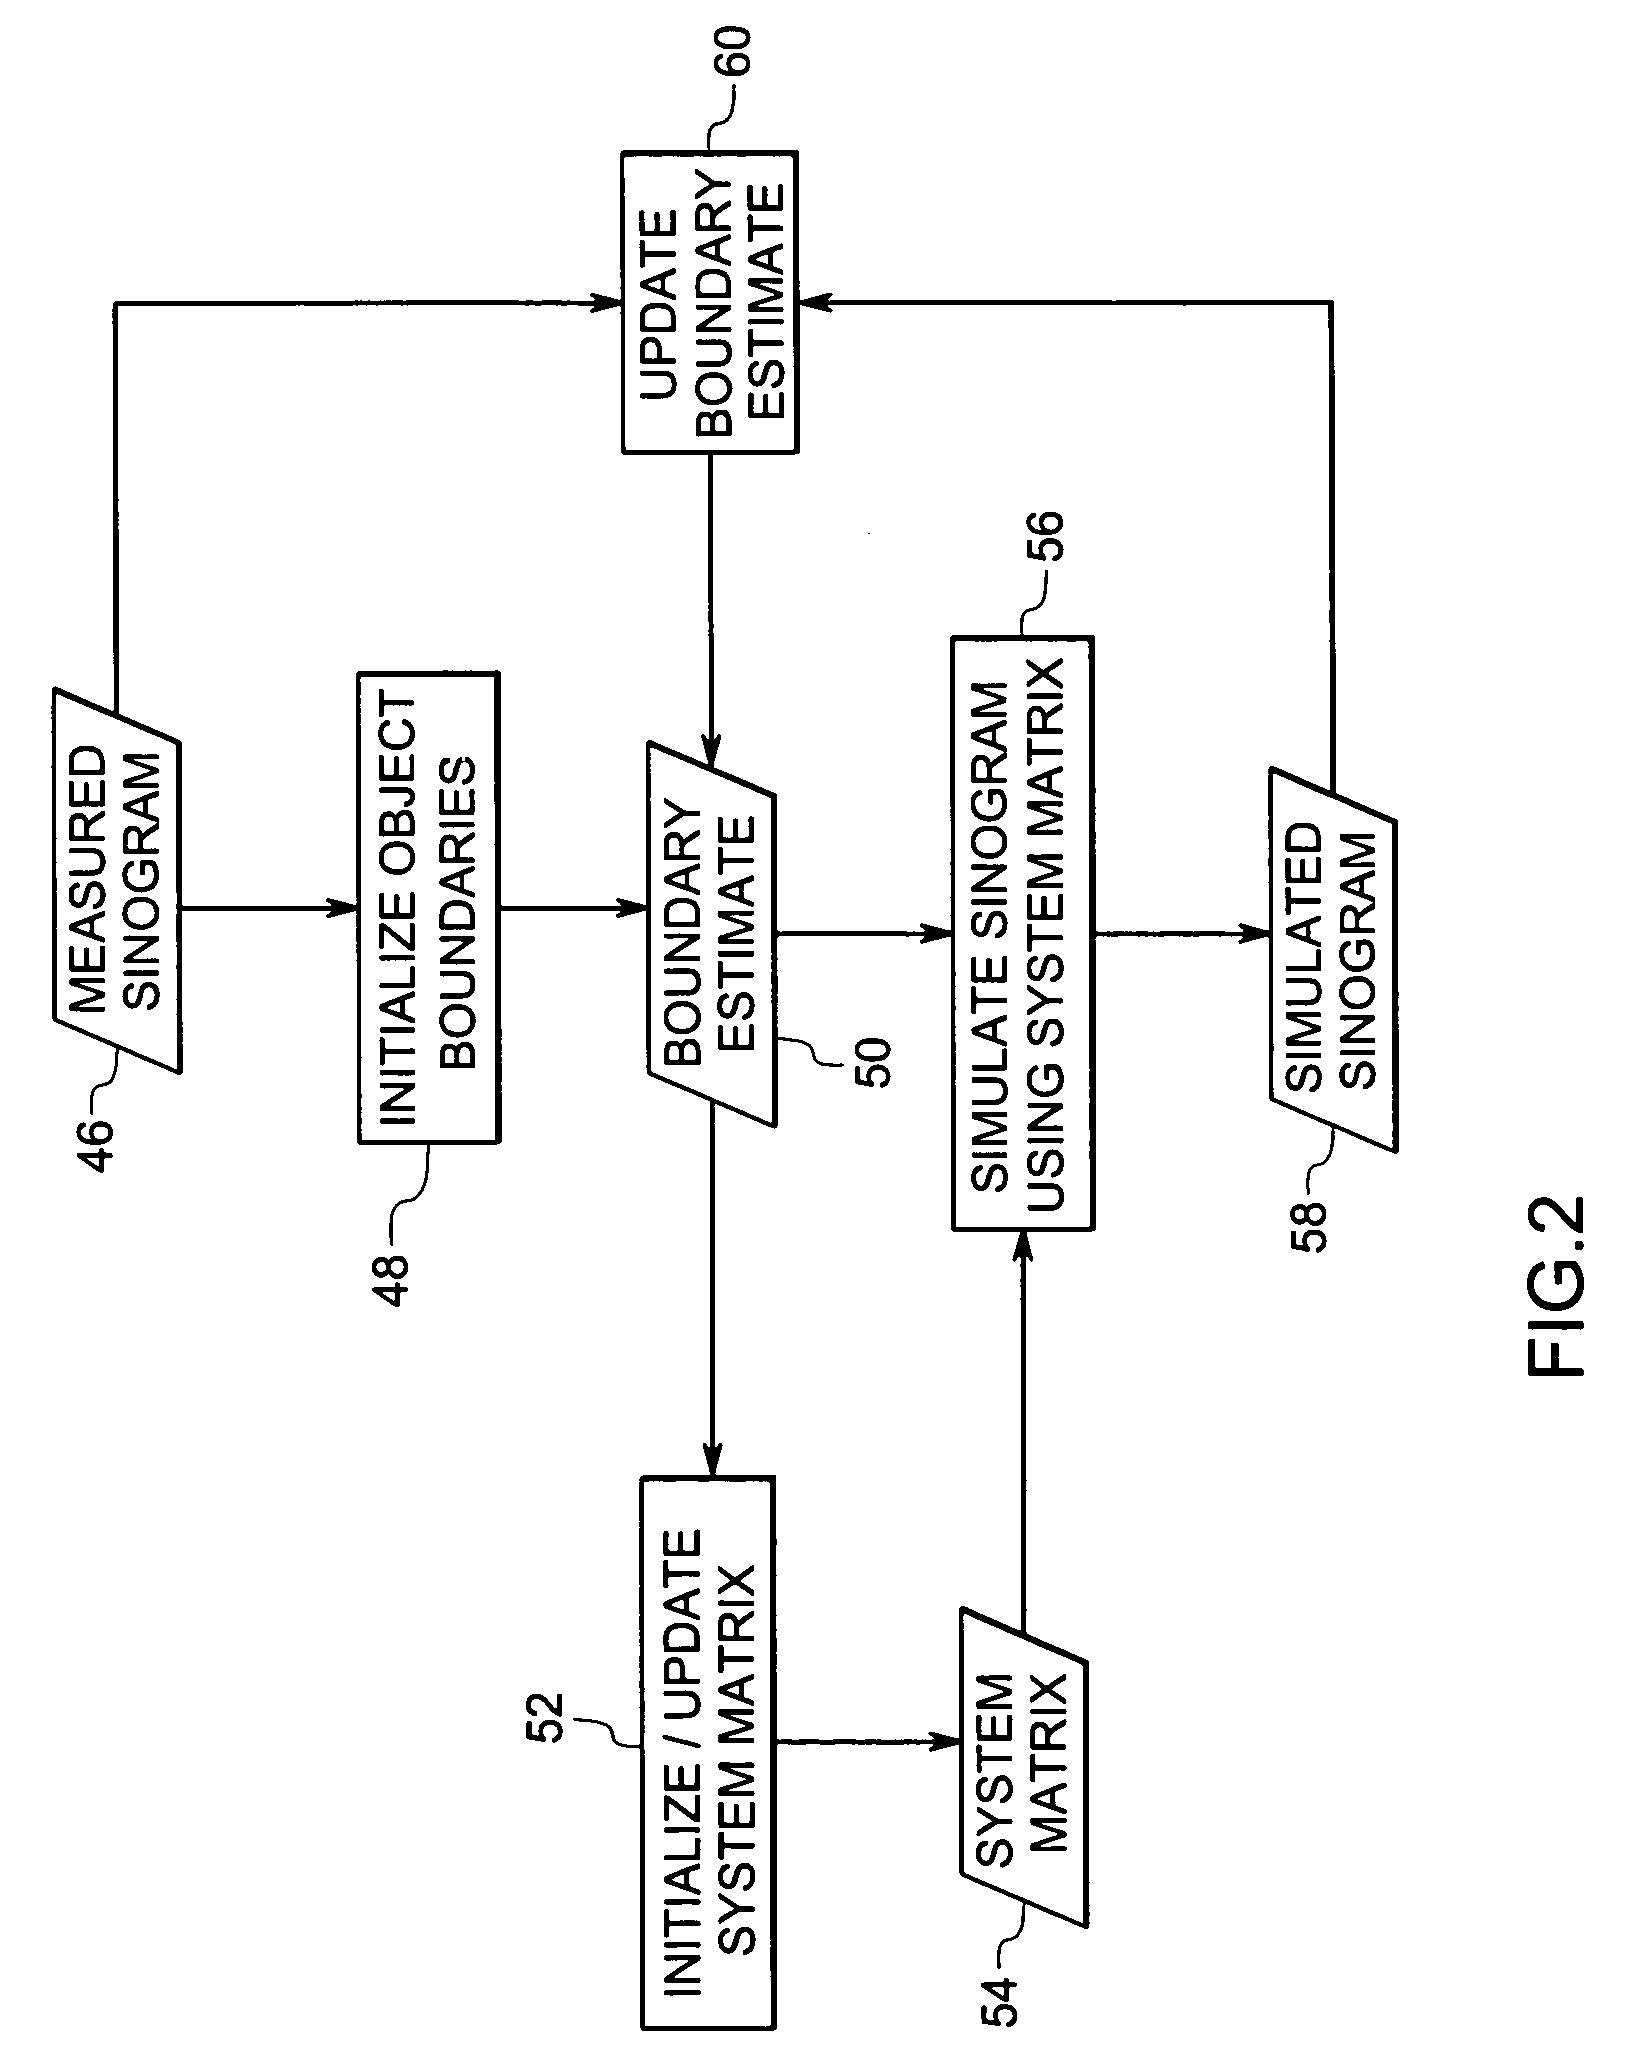 System and method for boundary estimation using CT metrology